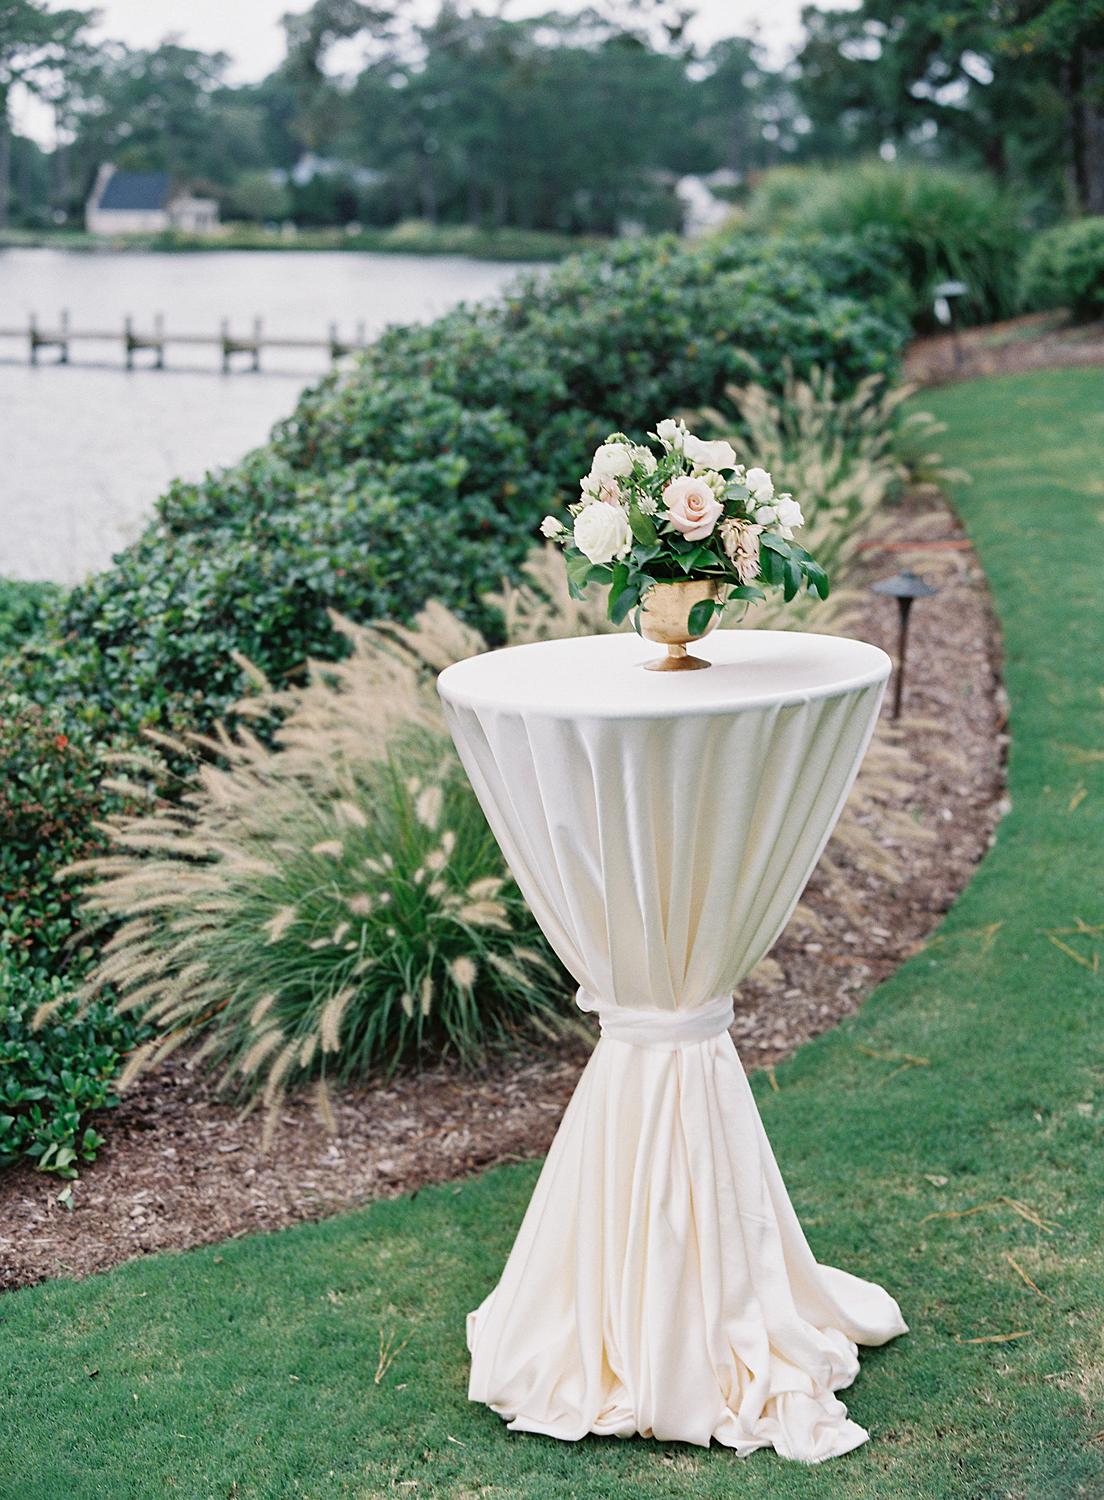 Cocktail table for intimate home wedding